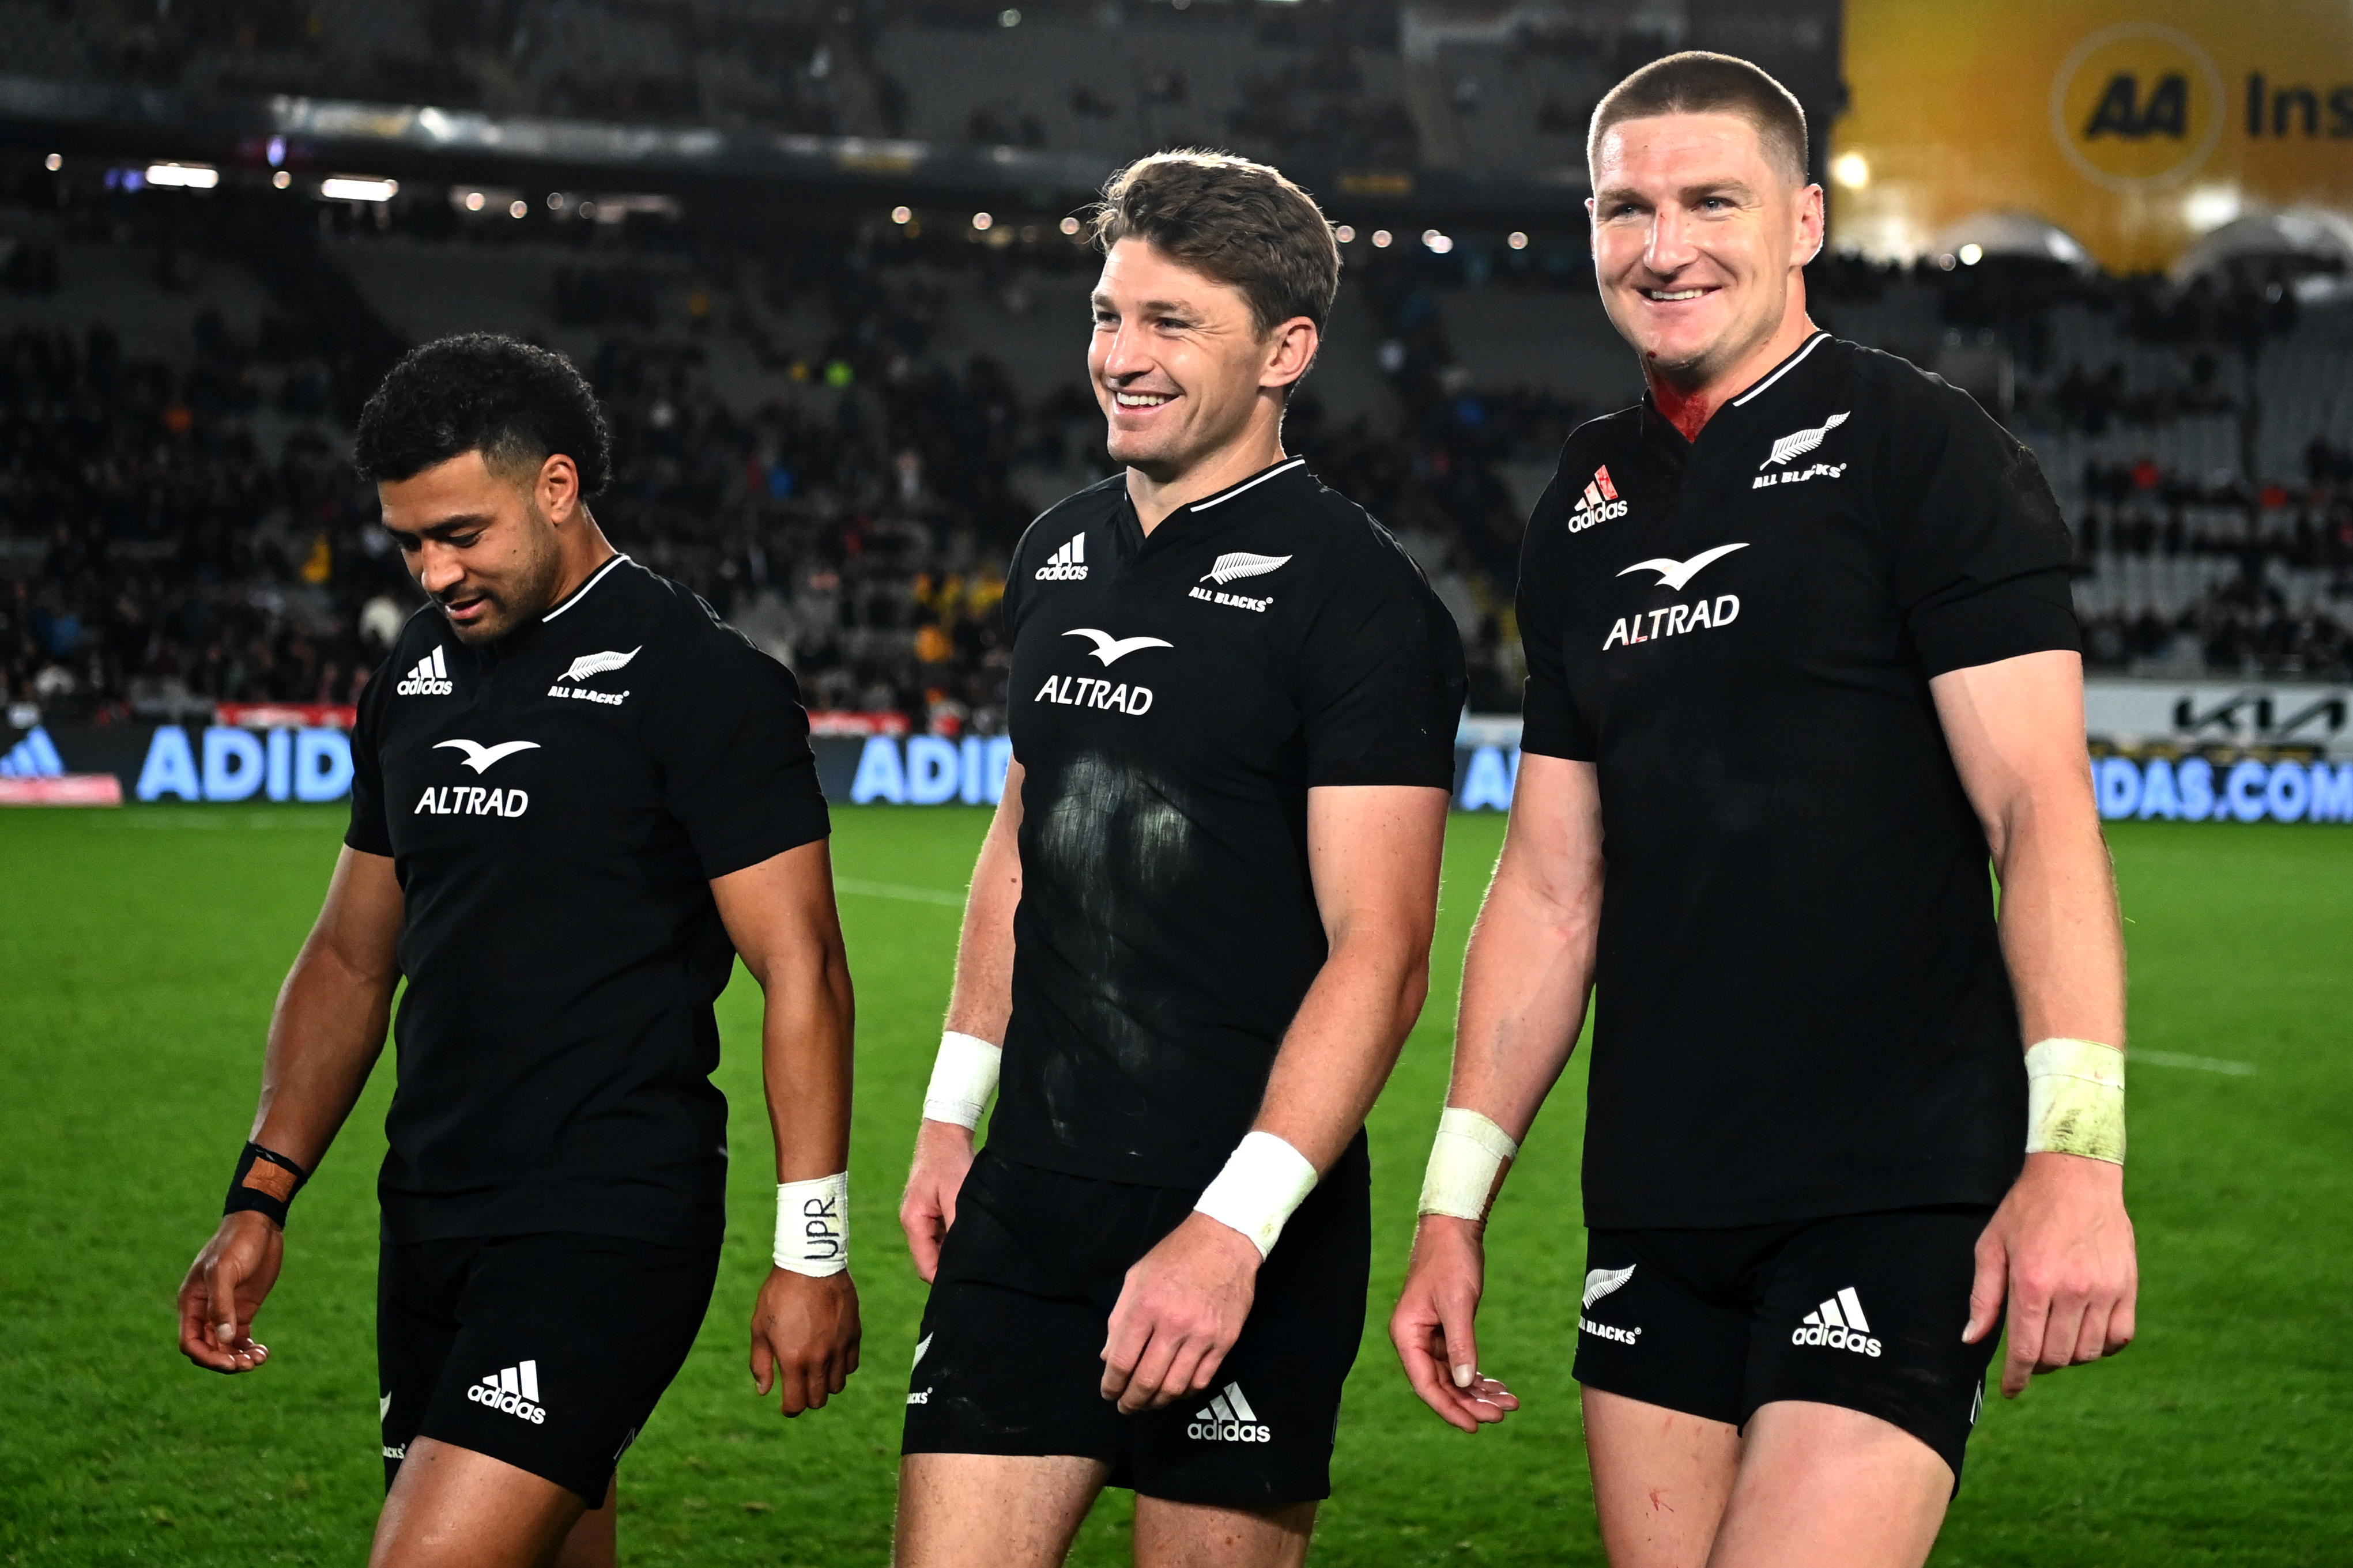 AUCKLAND, NEW ZEALAND - SEPTEMBER 24: Richie Moâ  unga, Beauden Barrett and Jordie Barrett of the All Blacks celebrate after winning The Rugby Championship and Bledisloe Cup match between the New Zealand All Blacks and the Australia Wallabies at Eden Park on September 24, 2022 in Auckland, New Zealand. (Photo by Hannah Peters/Getty Images)